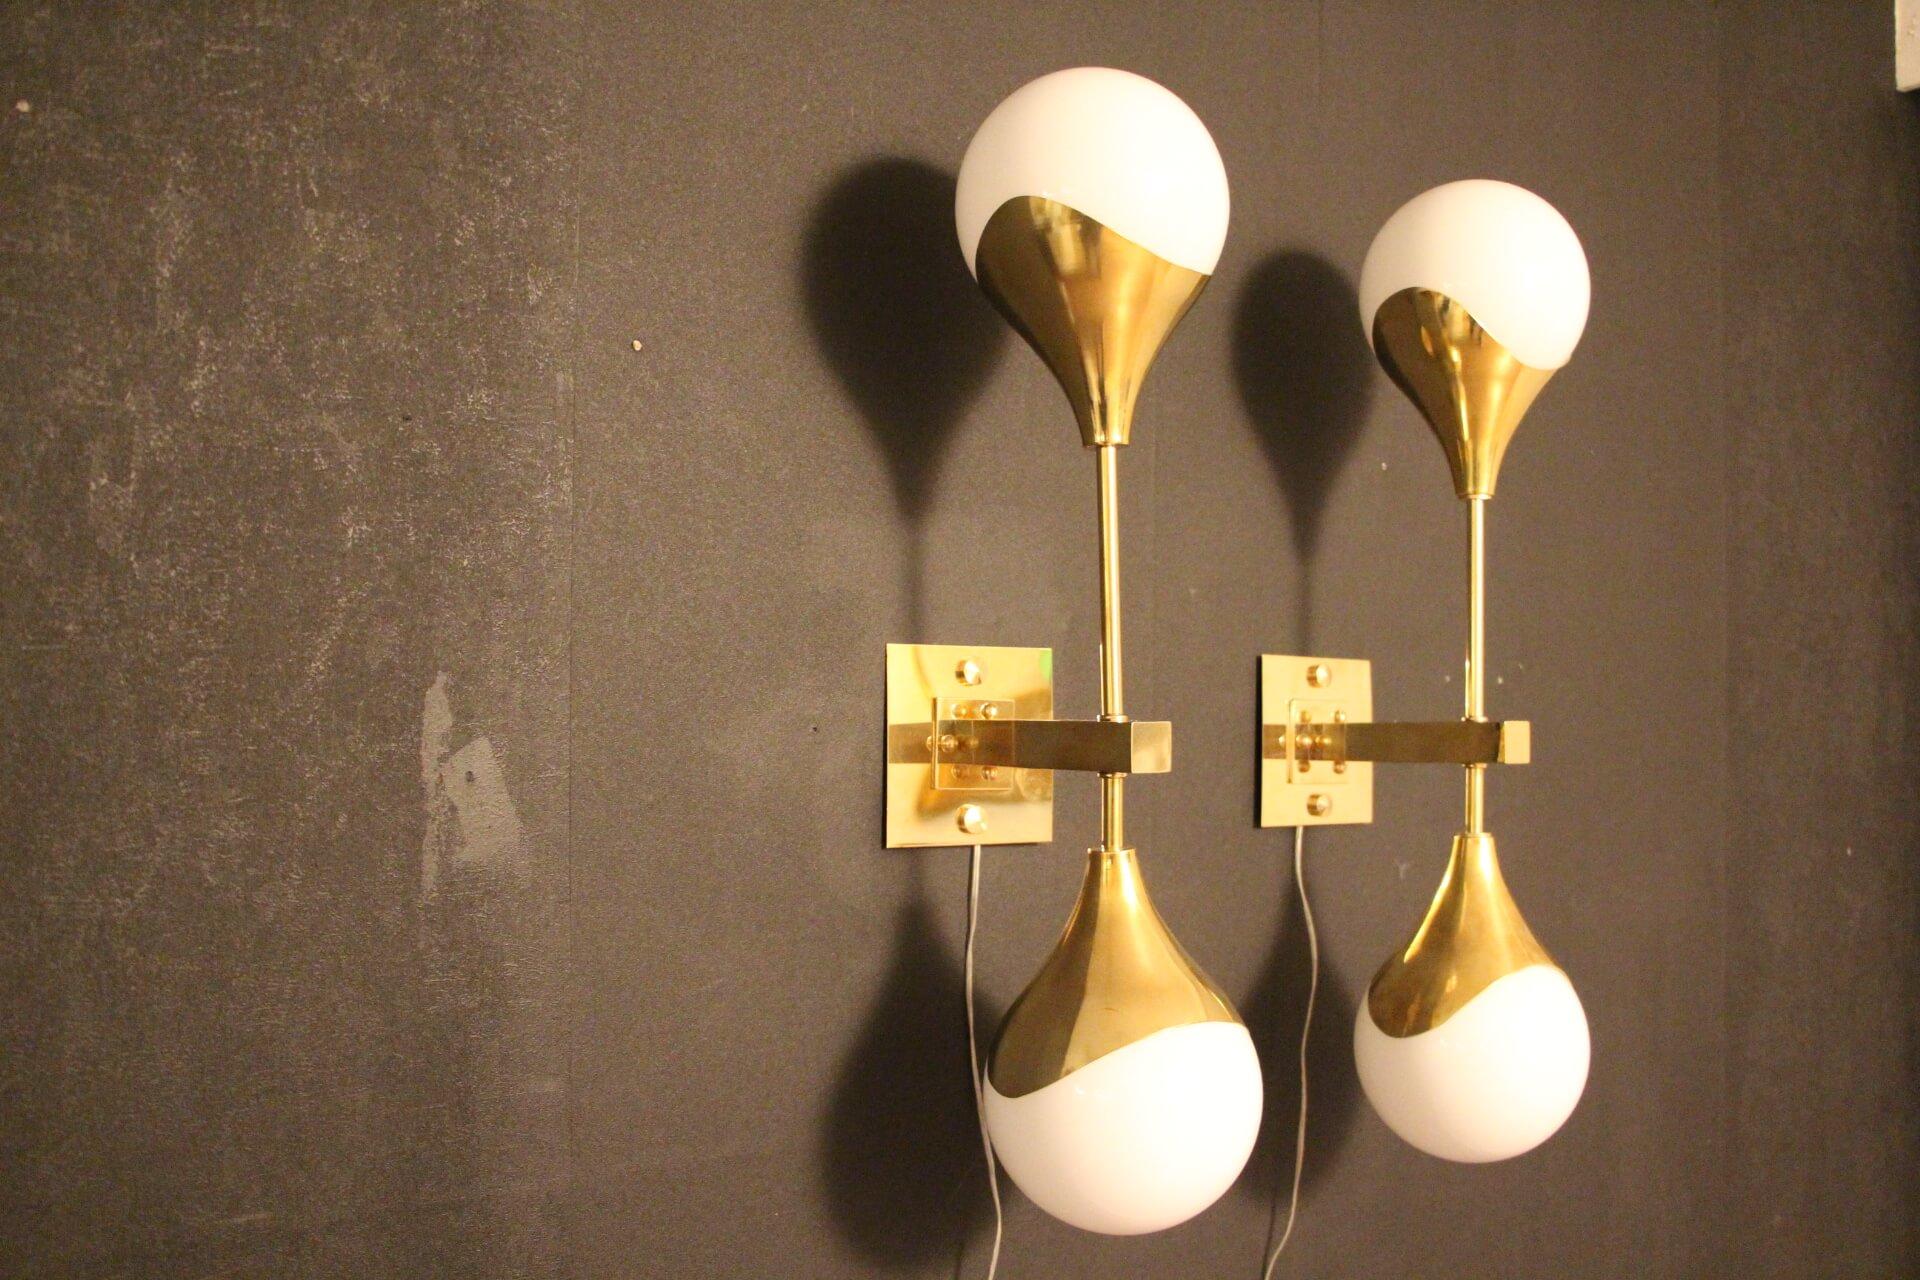 Italian Pair of White Murano Glass and Brass Wall Sconces, Stilnovo Style Wall Lights For Sale